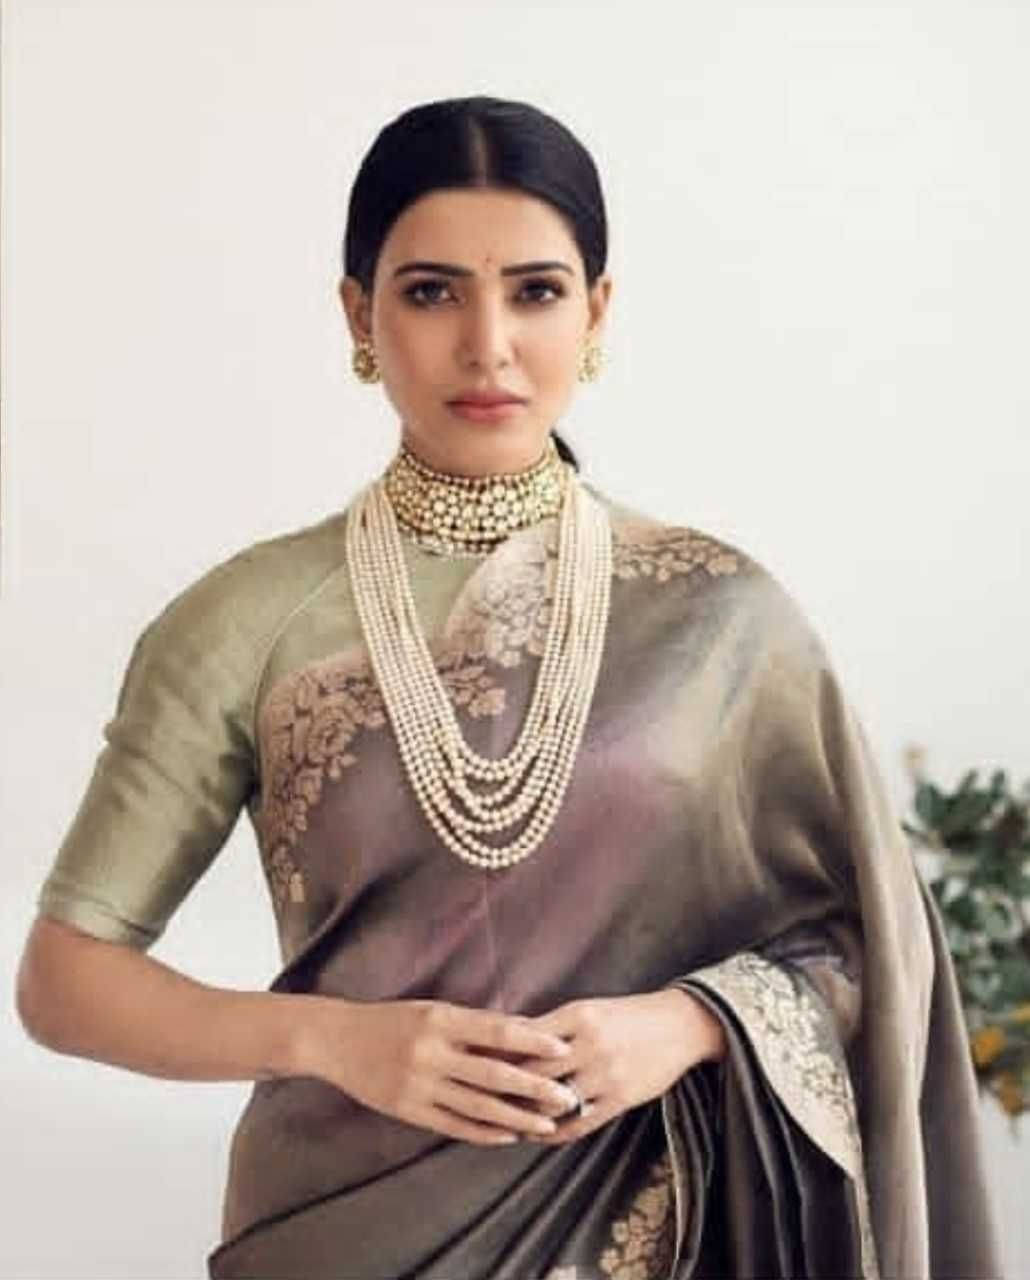 Samantha Saree With Pearl Necklace Background